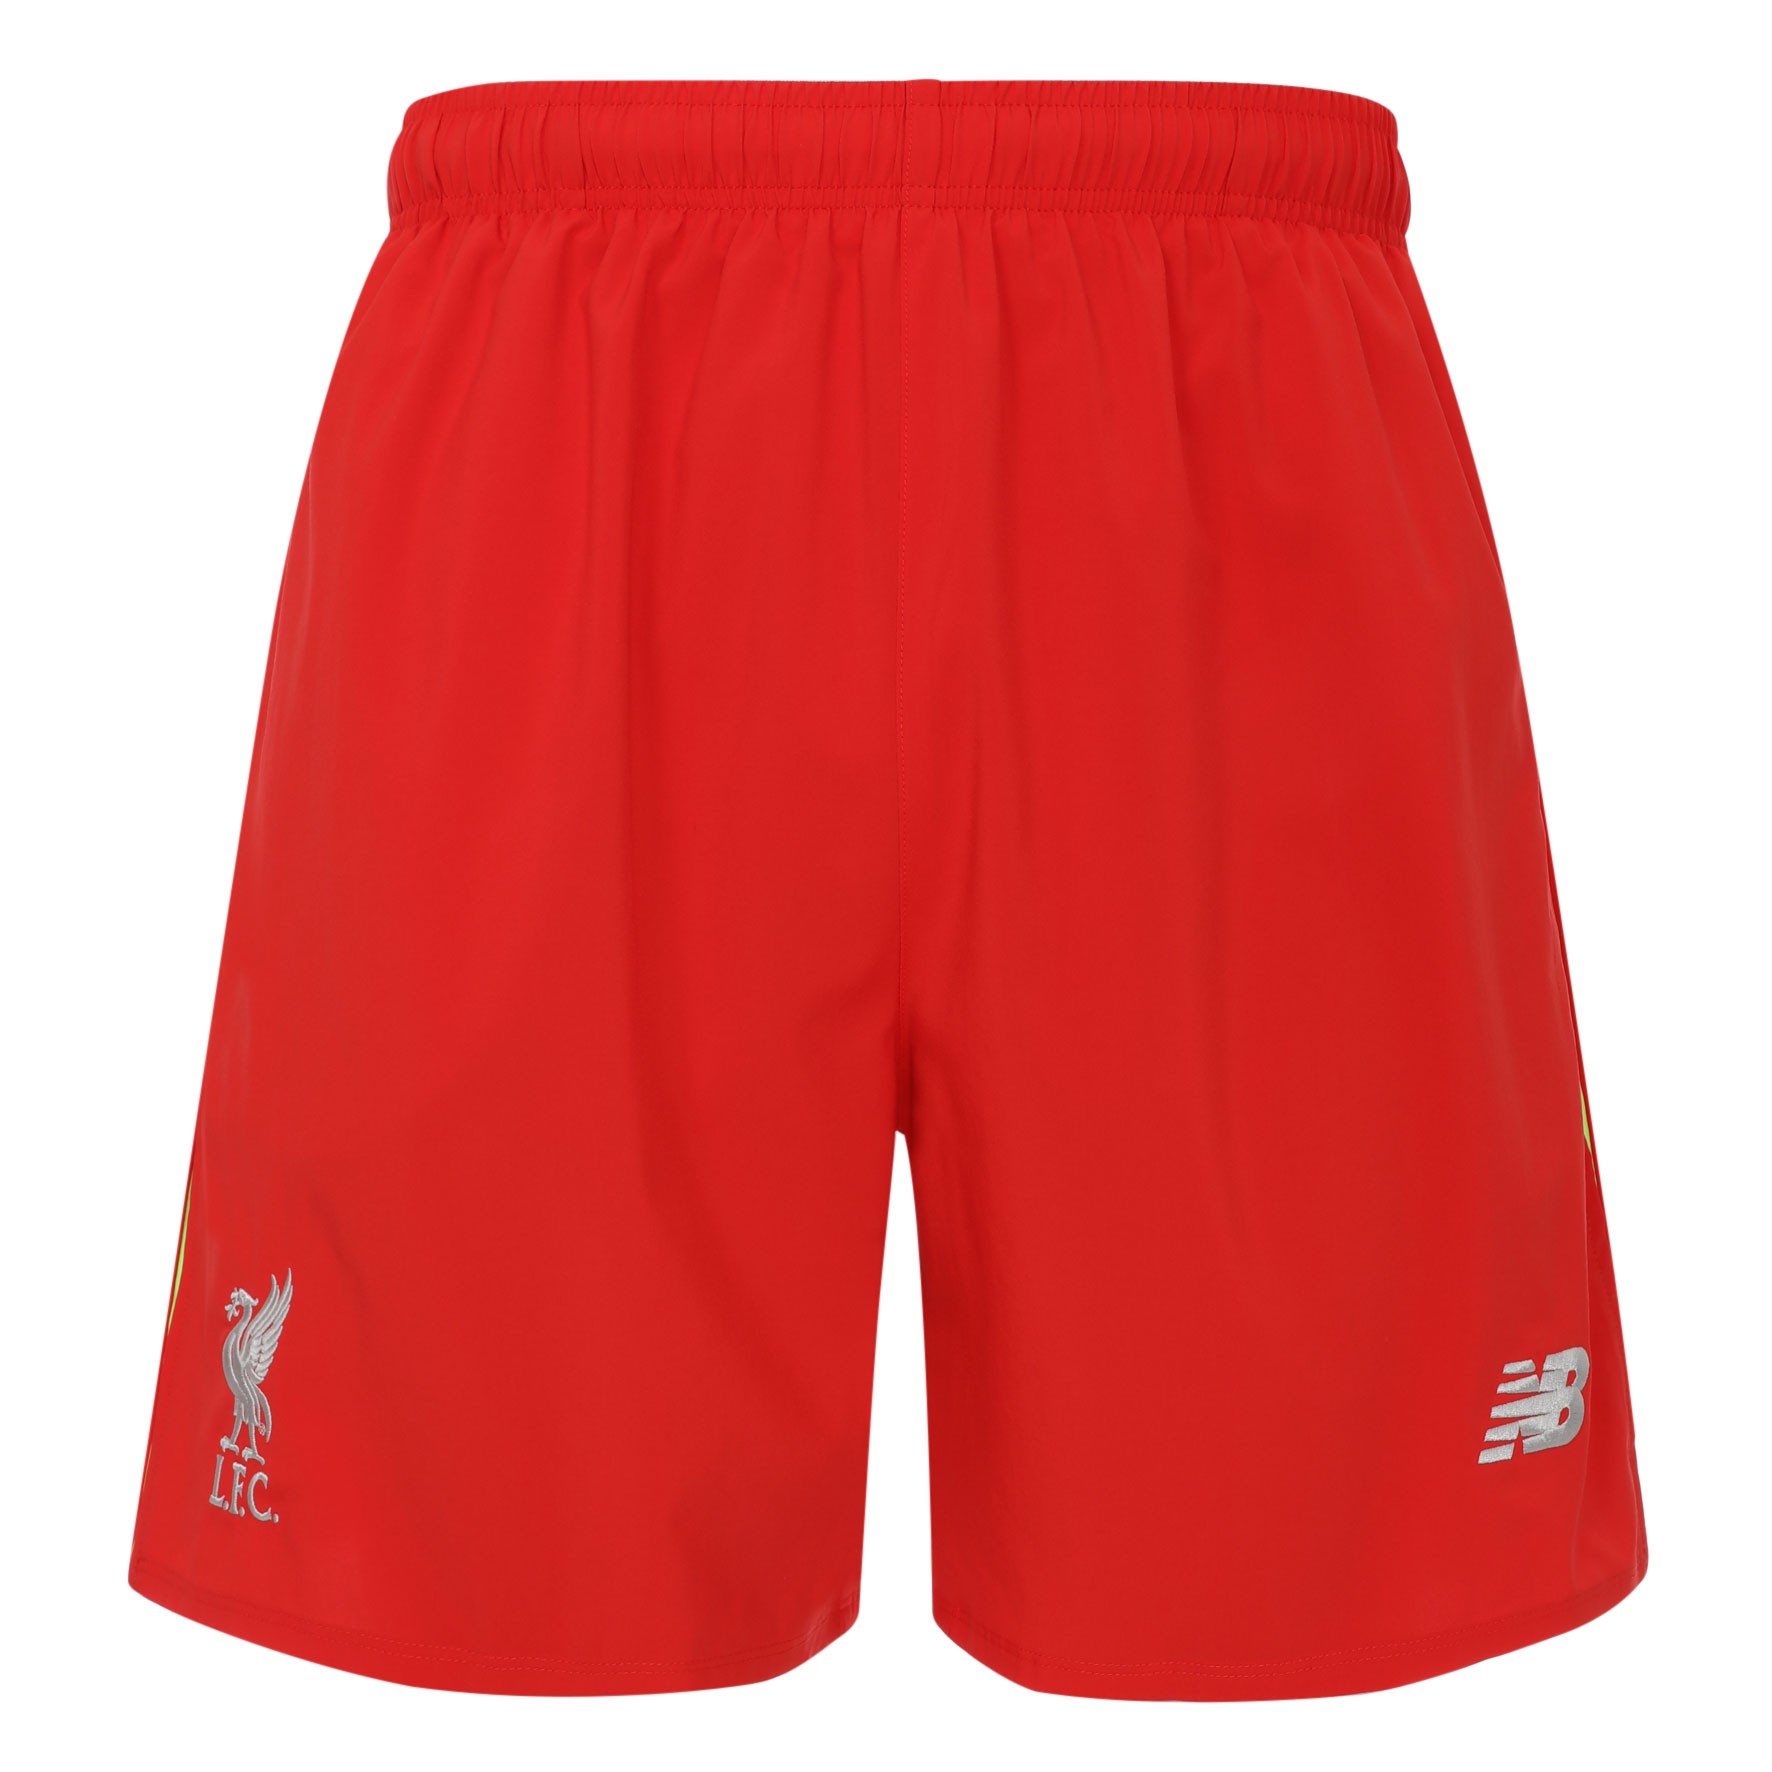 LFC Mens Red Training Woven Shorts 18/19